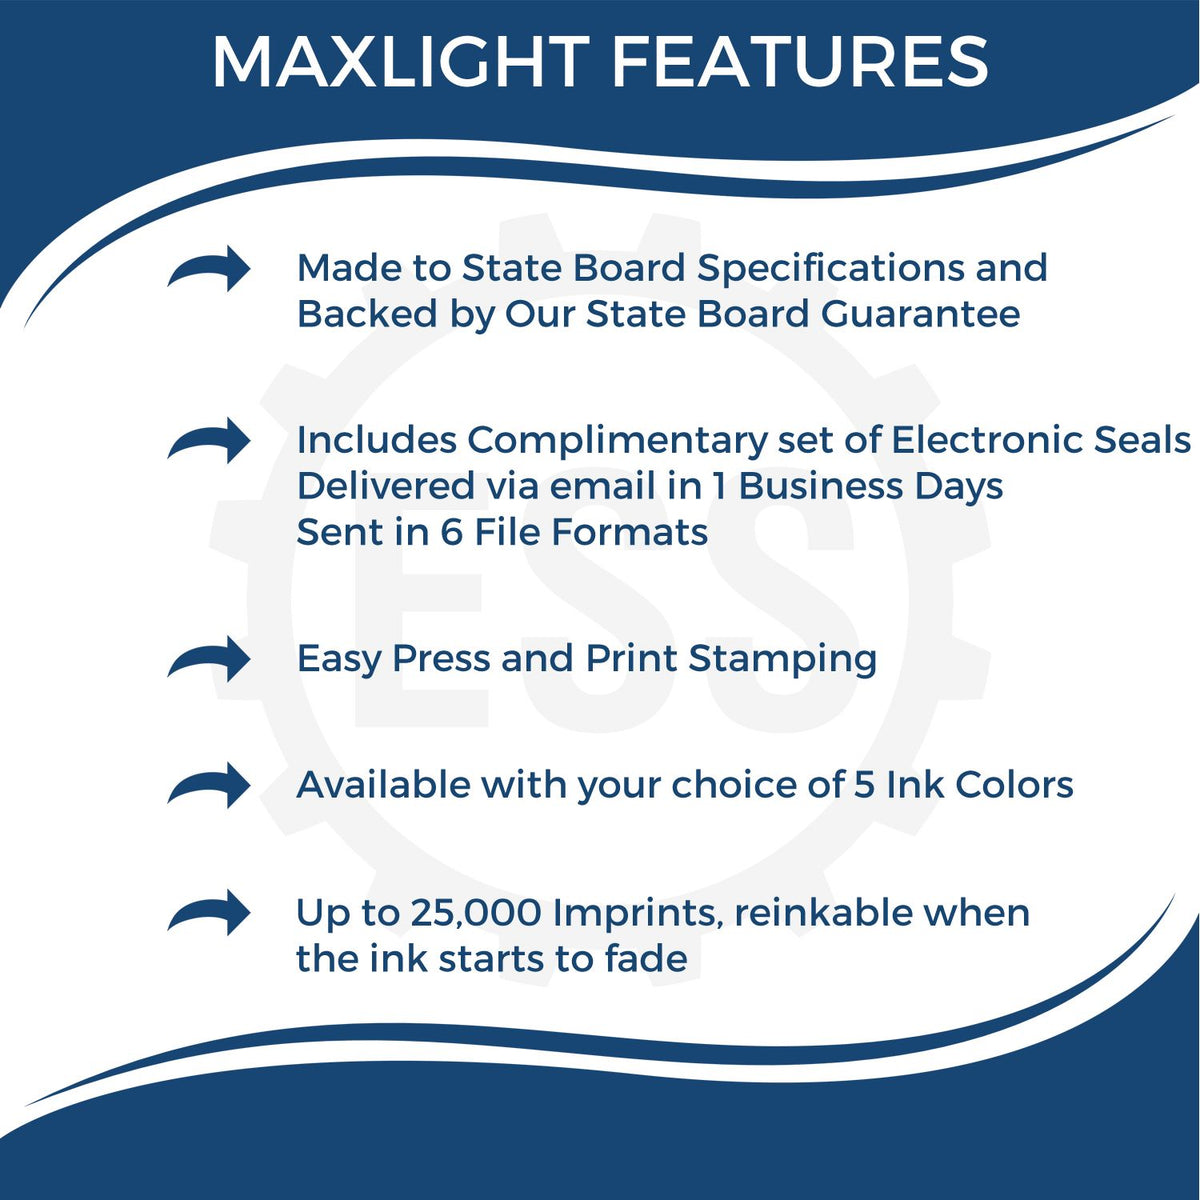 A picture of an infographic highlighting the selling points for the Premium MaxLight Pre-Inked Colorado Engineering Stamp